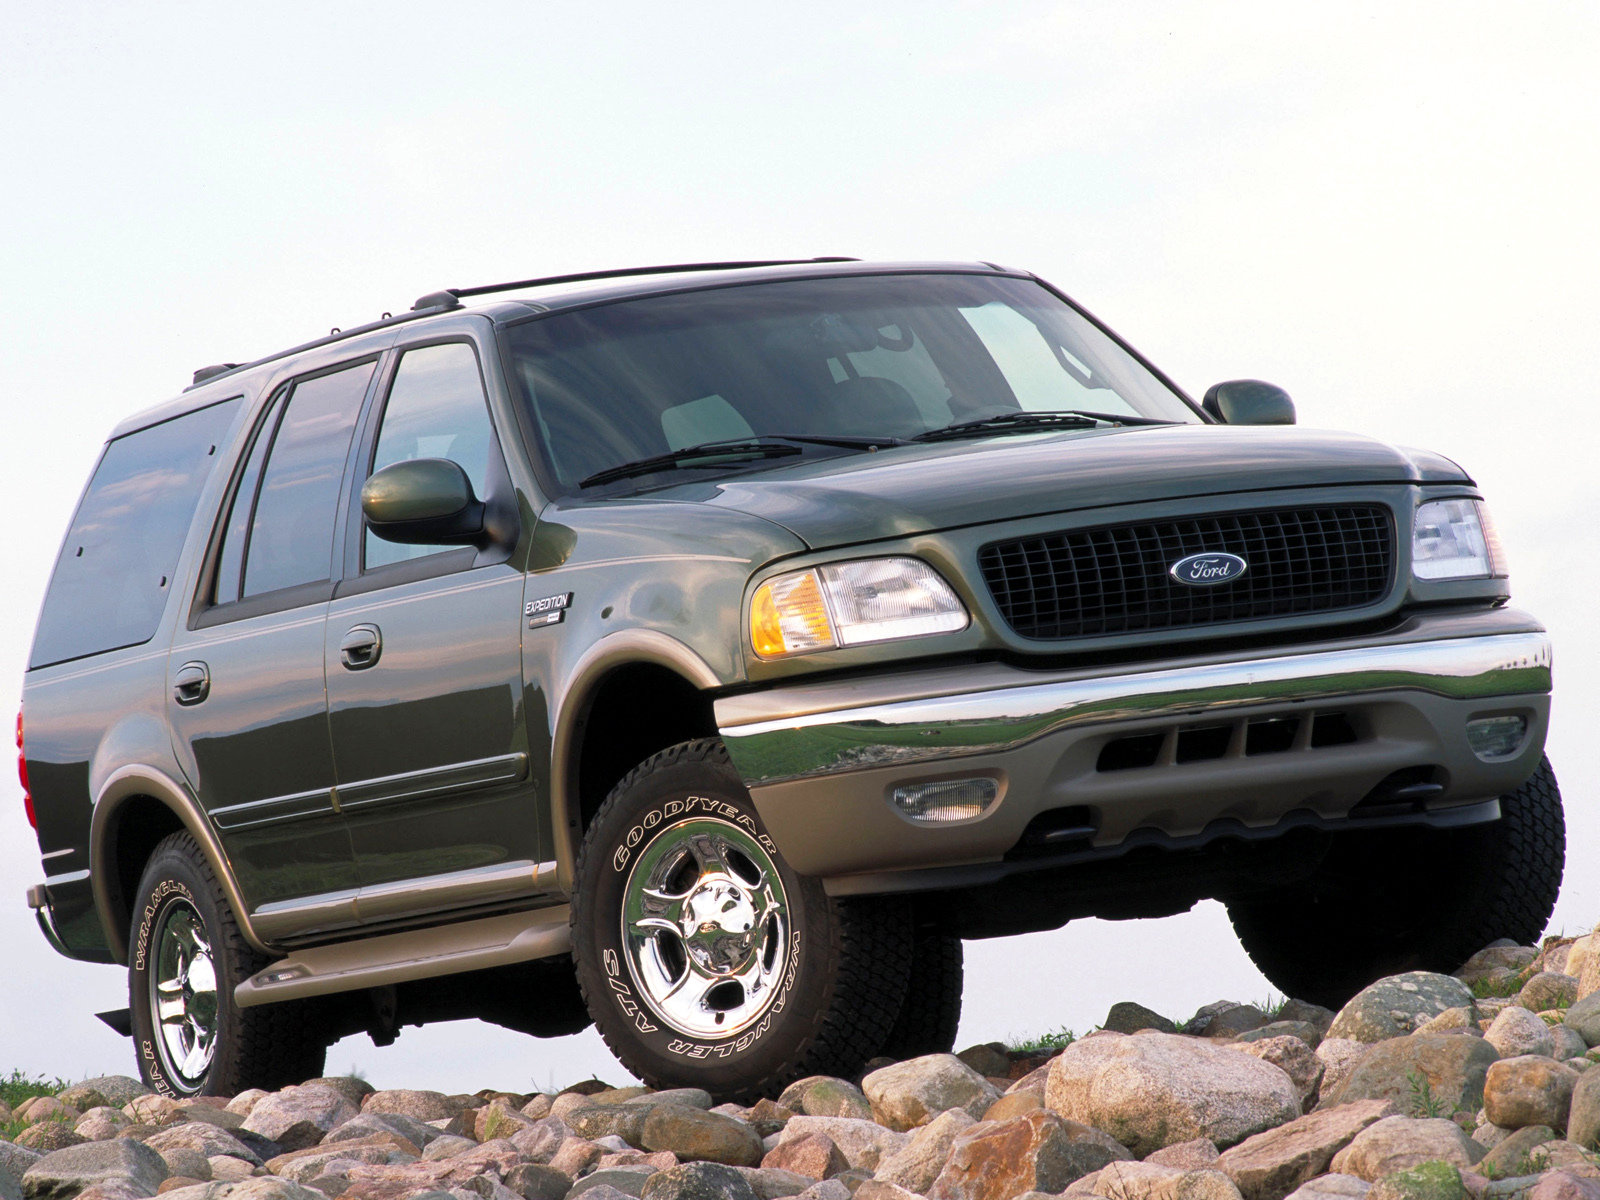 Ford Expedition, g-car, ремонт Ford Expedition, обслуживание Ford Expedition, сервис Ford Expedition, форд экспедишн, ремонт форд экспедишн, сервис форд экспедишн, тюнинг форд экспедишн